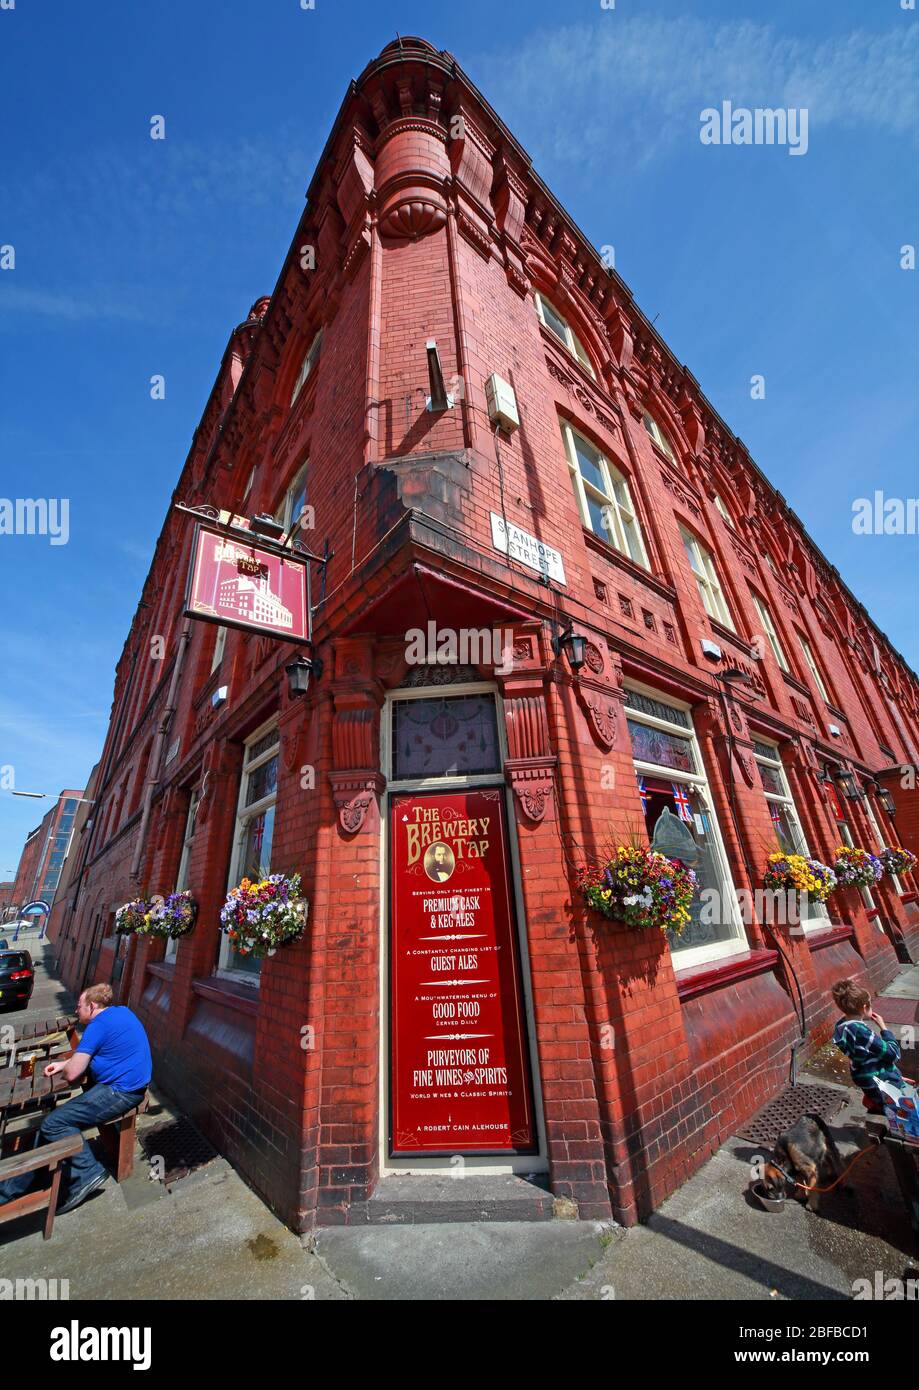 Cains Brewery Tap, Classic British Pub, 39 Stanhope St, Liverpool, Merseyside,England, UK, L8 5RE Stock Photo